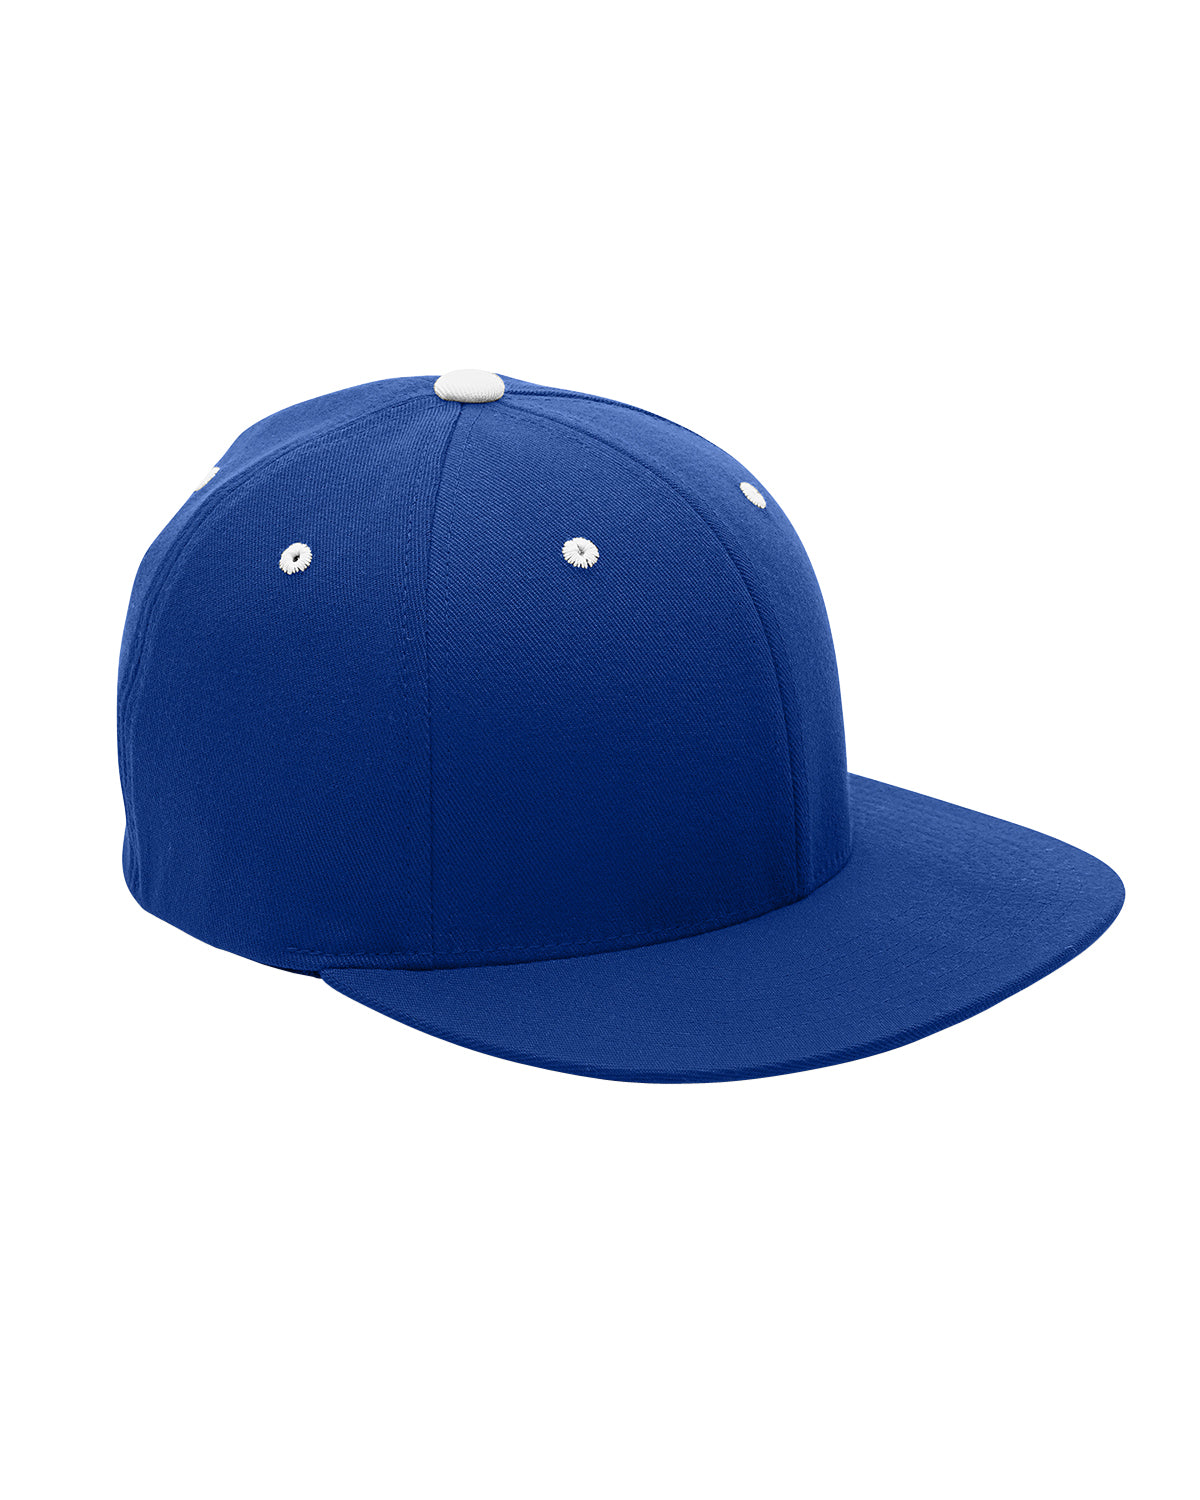 Team 365 ATB101 Mens Moisture Wicking Stretch Fit Hat Royal Blue Front